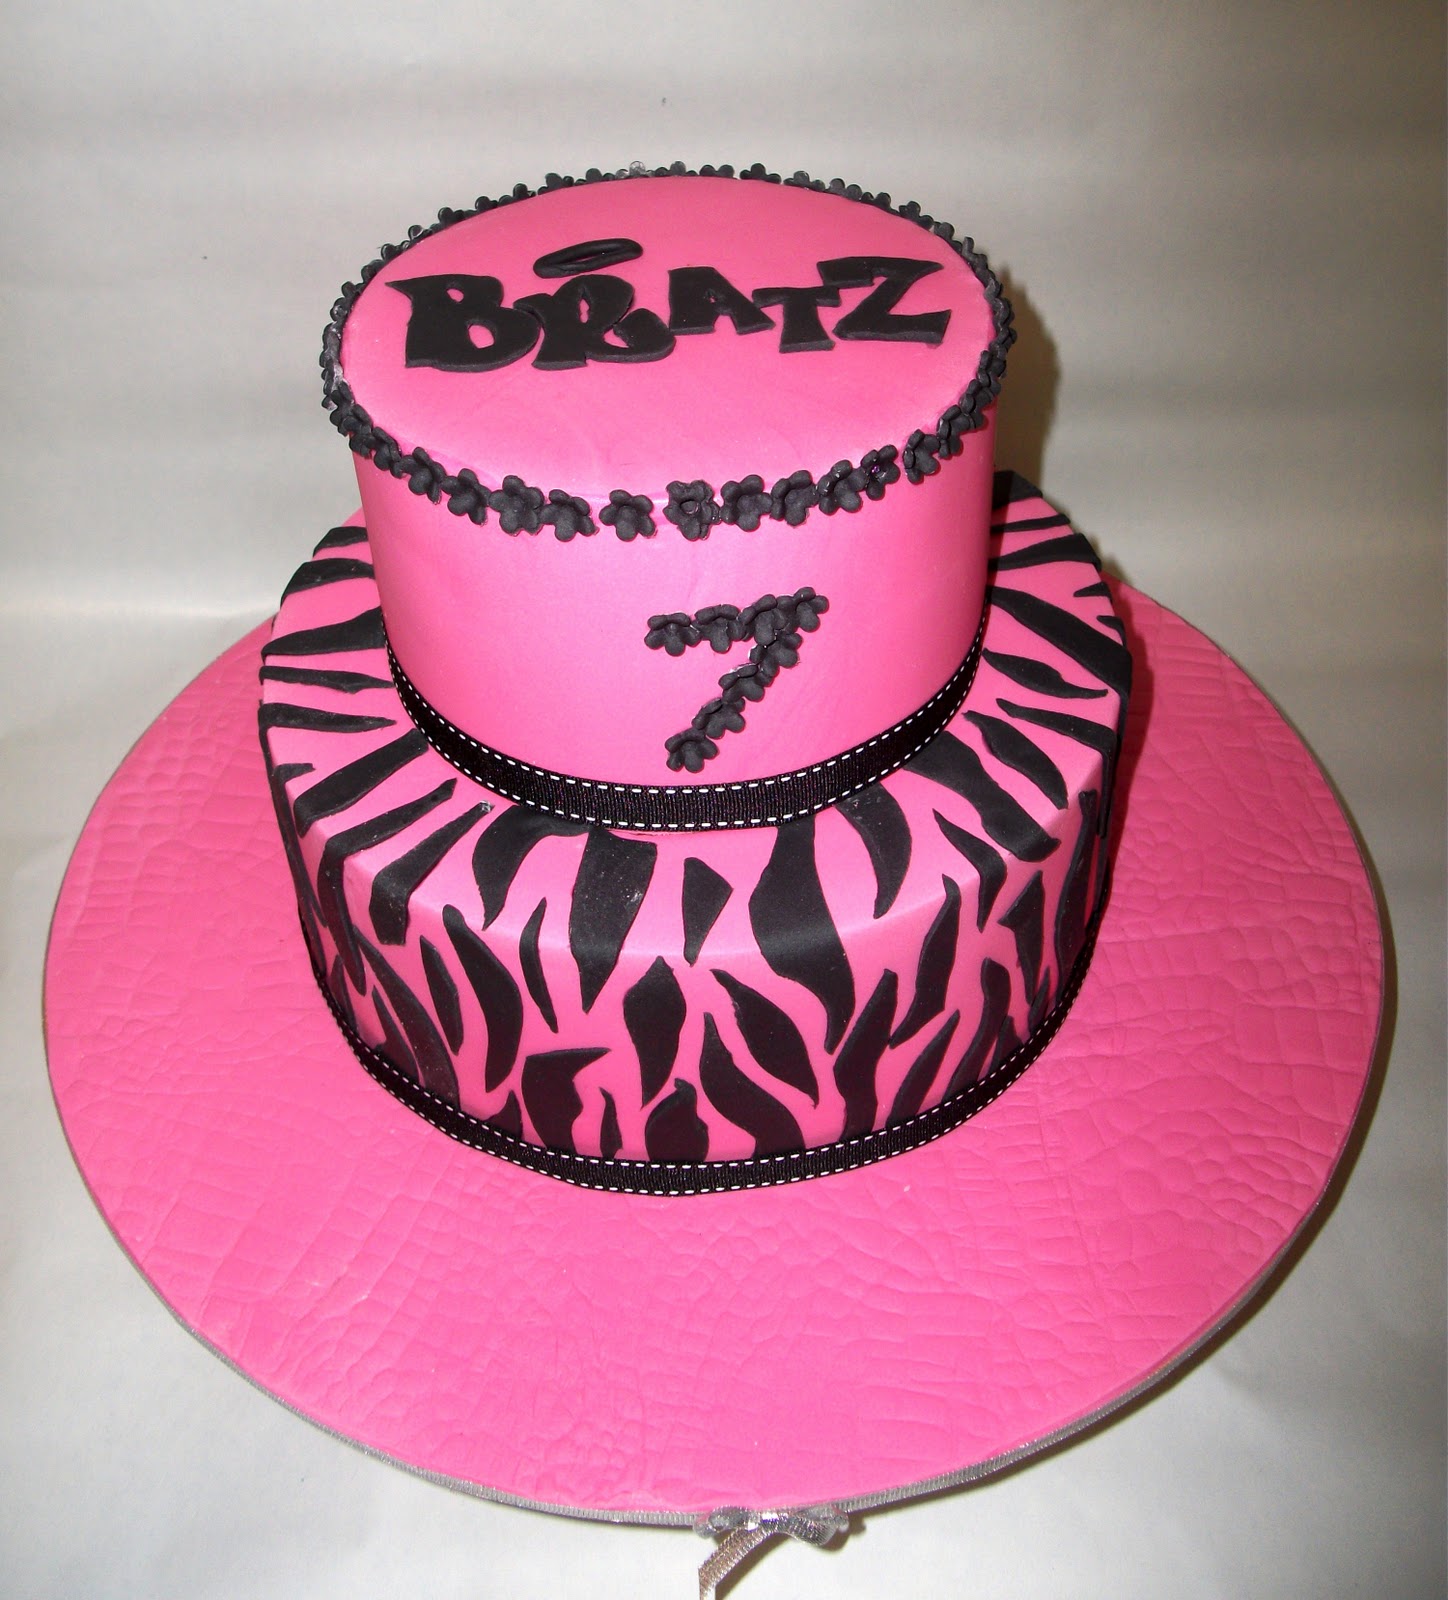 hot pink wedding cake cake with a hand cut bratz logo topping the cake a huge hit with the 